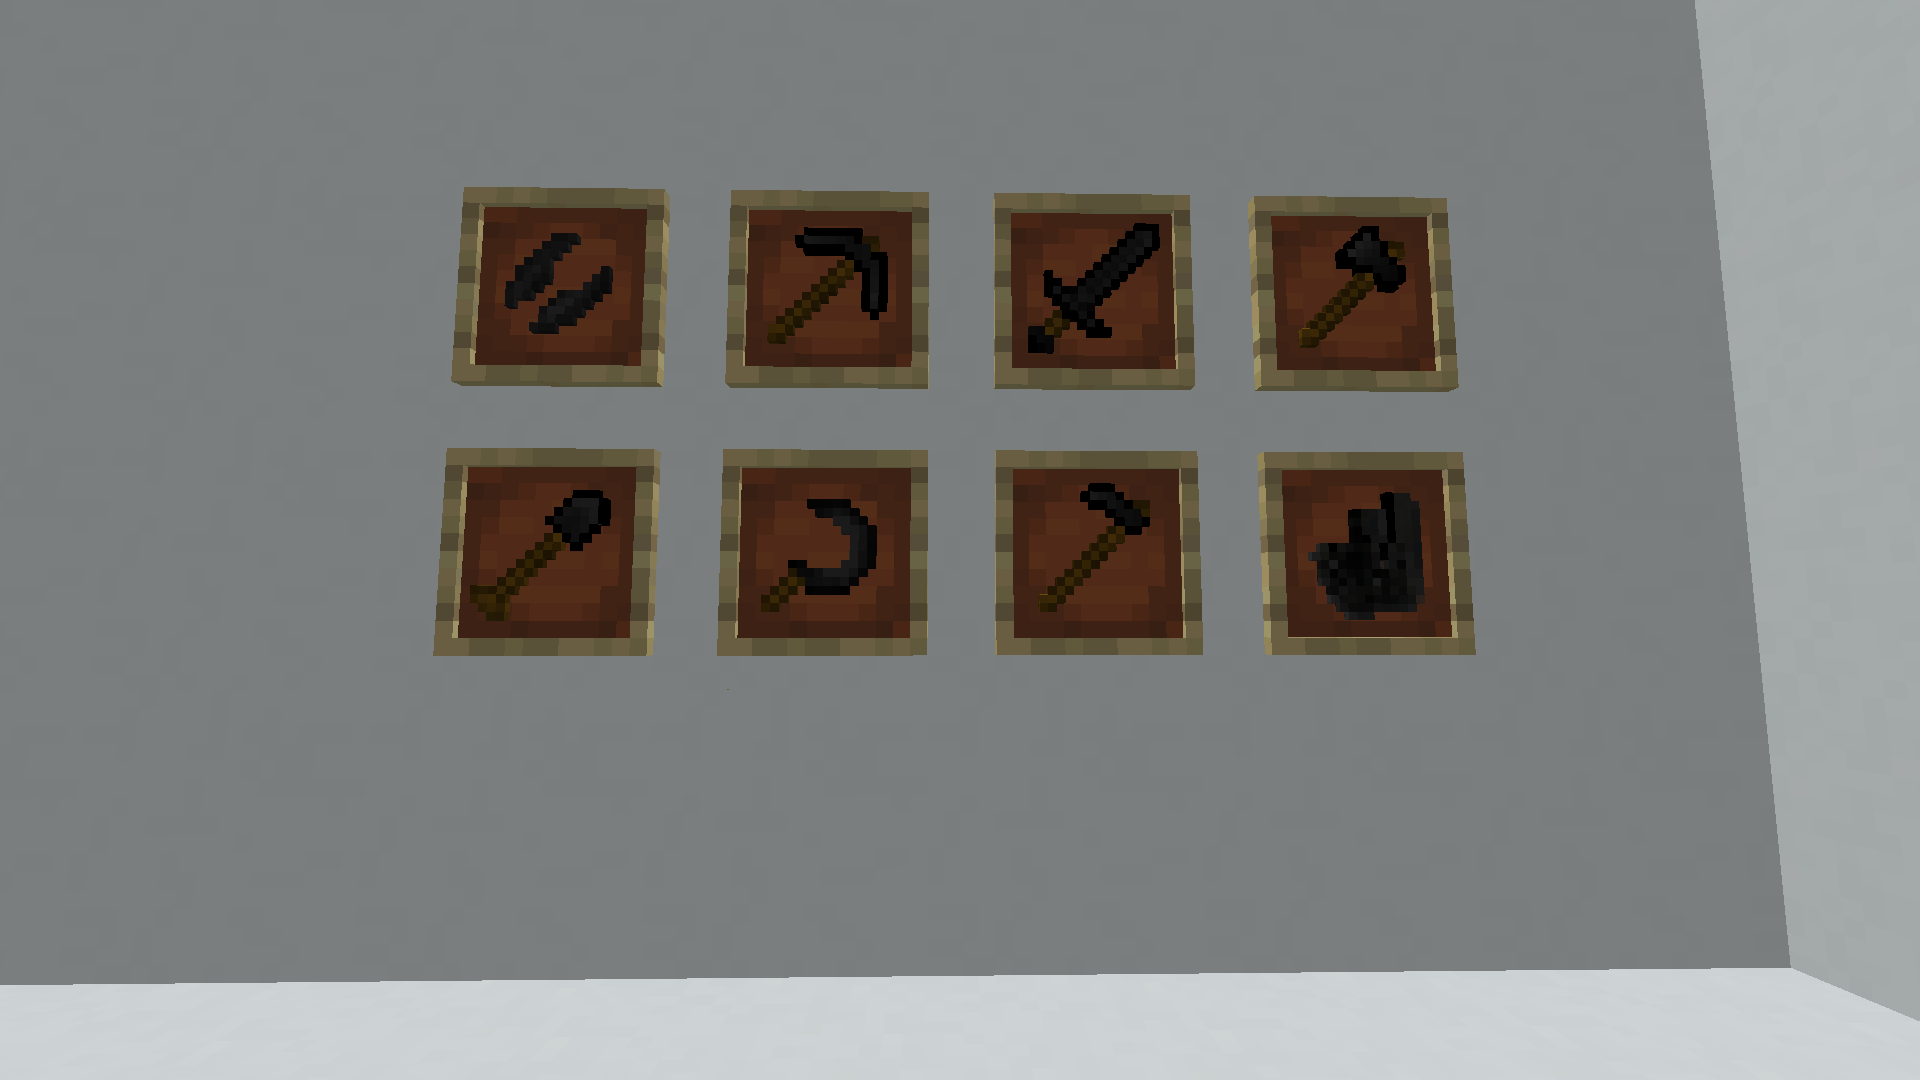 ender bone tools and items